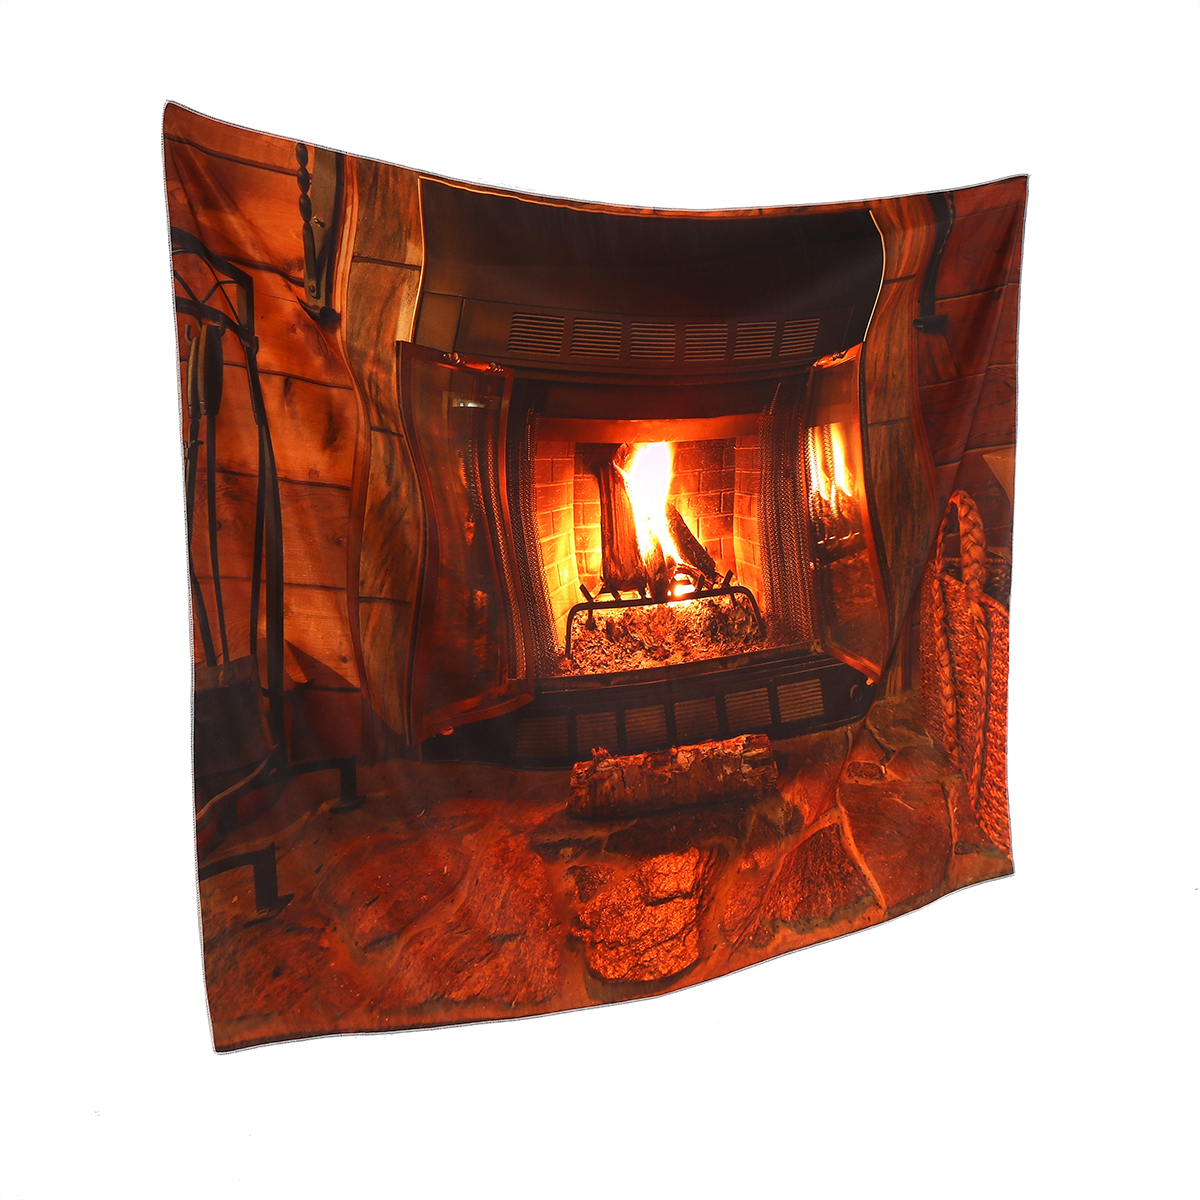 Polyester-Wall-Hanging-Tapestry-Art-Home-Decor-Fireplace-Pattern-Blankets-For-Home-Bedroom-Porch-Han-1636374-4